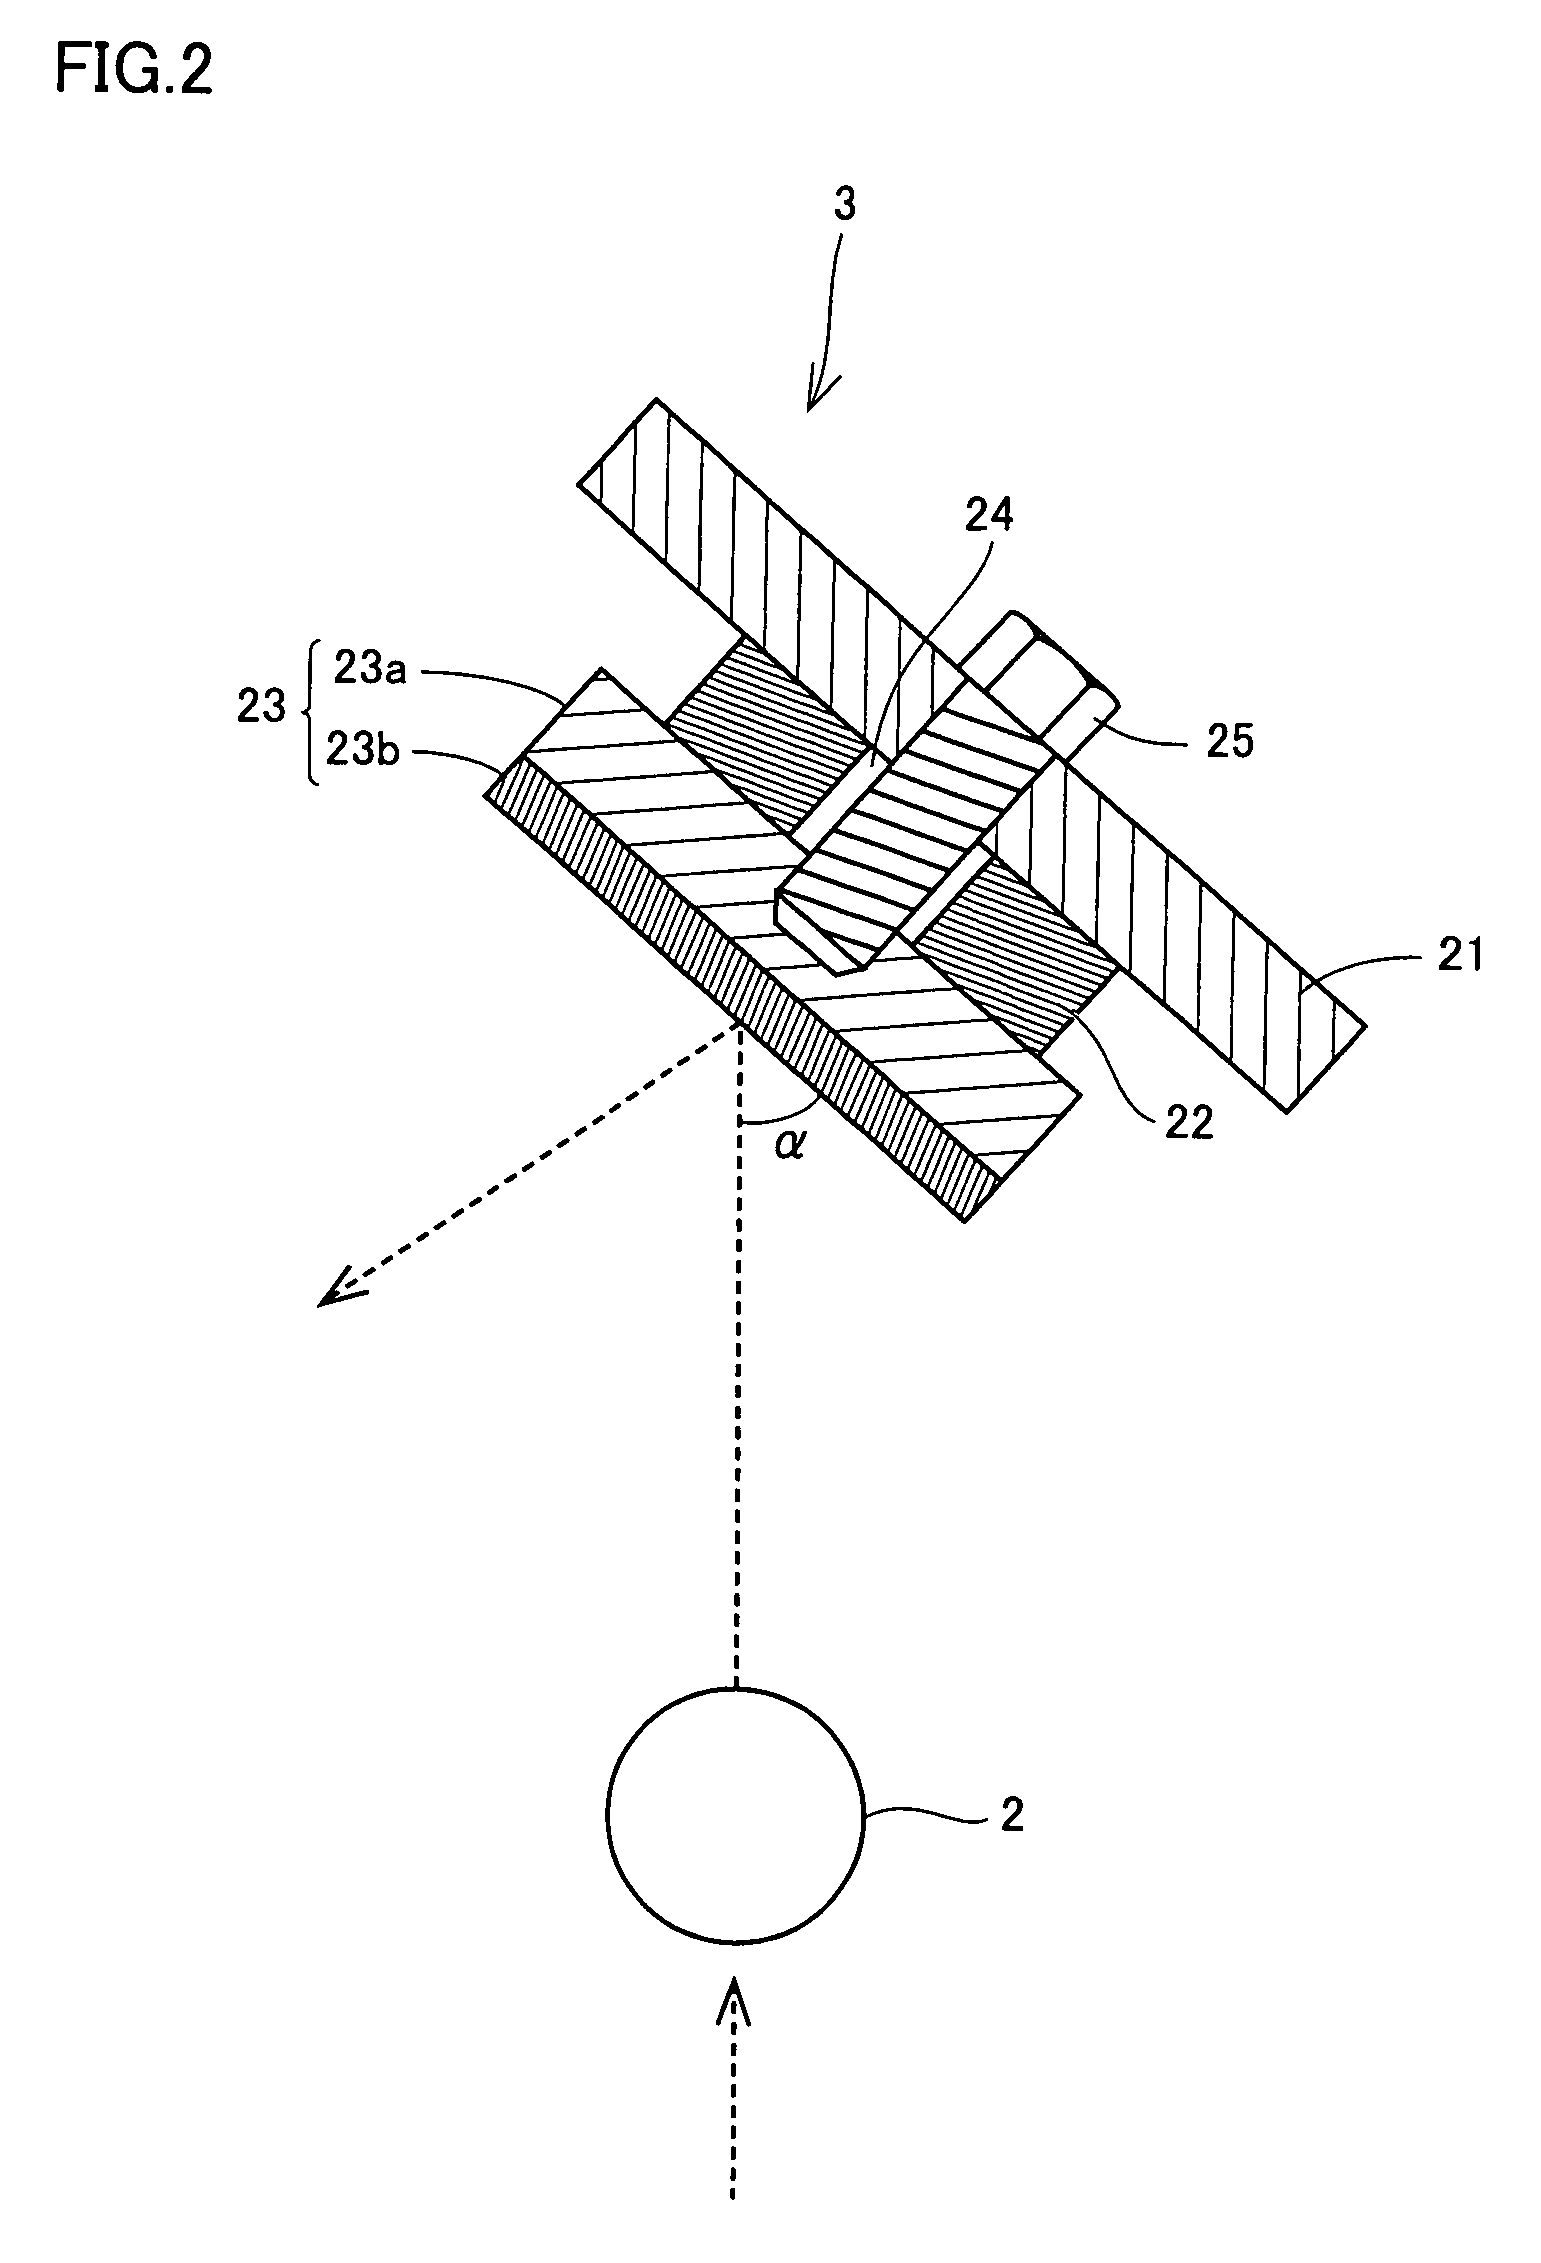 Method of measuring coefficient of dynamic friction between golf ball and collisional plate